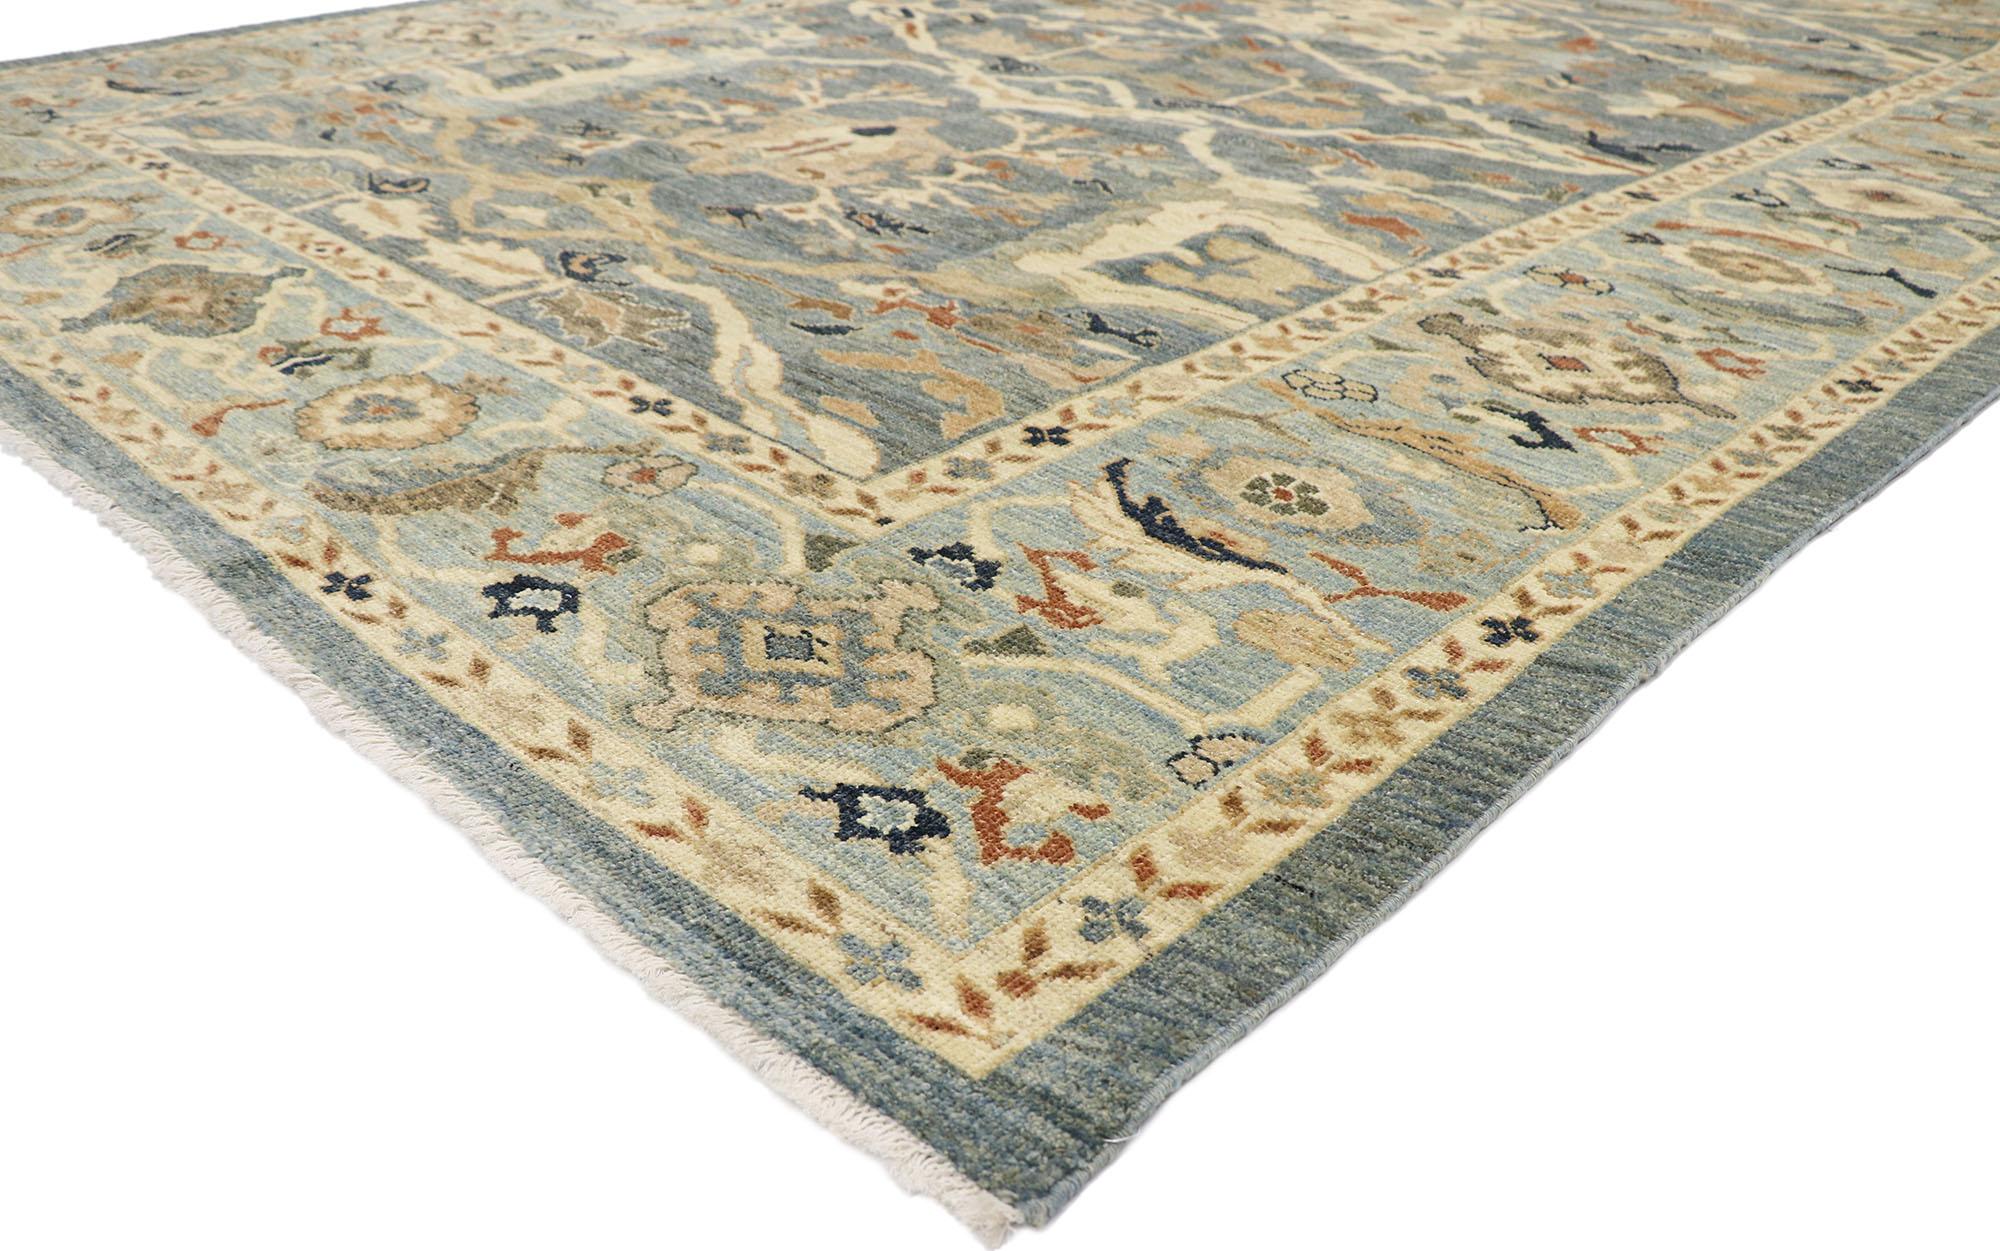 60912 Modern Turkish Persian Sultanabad Rug, 08'10 x 12'04. Embark on a journey where Biophilic Design seamlessly intertwines with timeless allure, presenting an exquisite hand-knotted wool Turkish Persian Sultanabad rug. A symphony of earth-tone